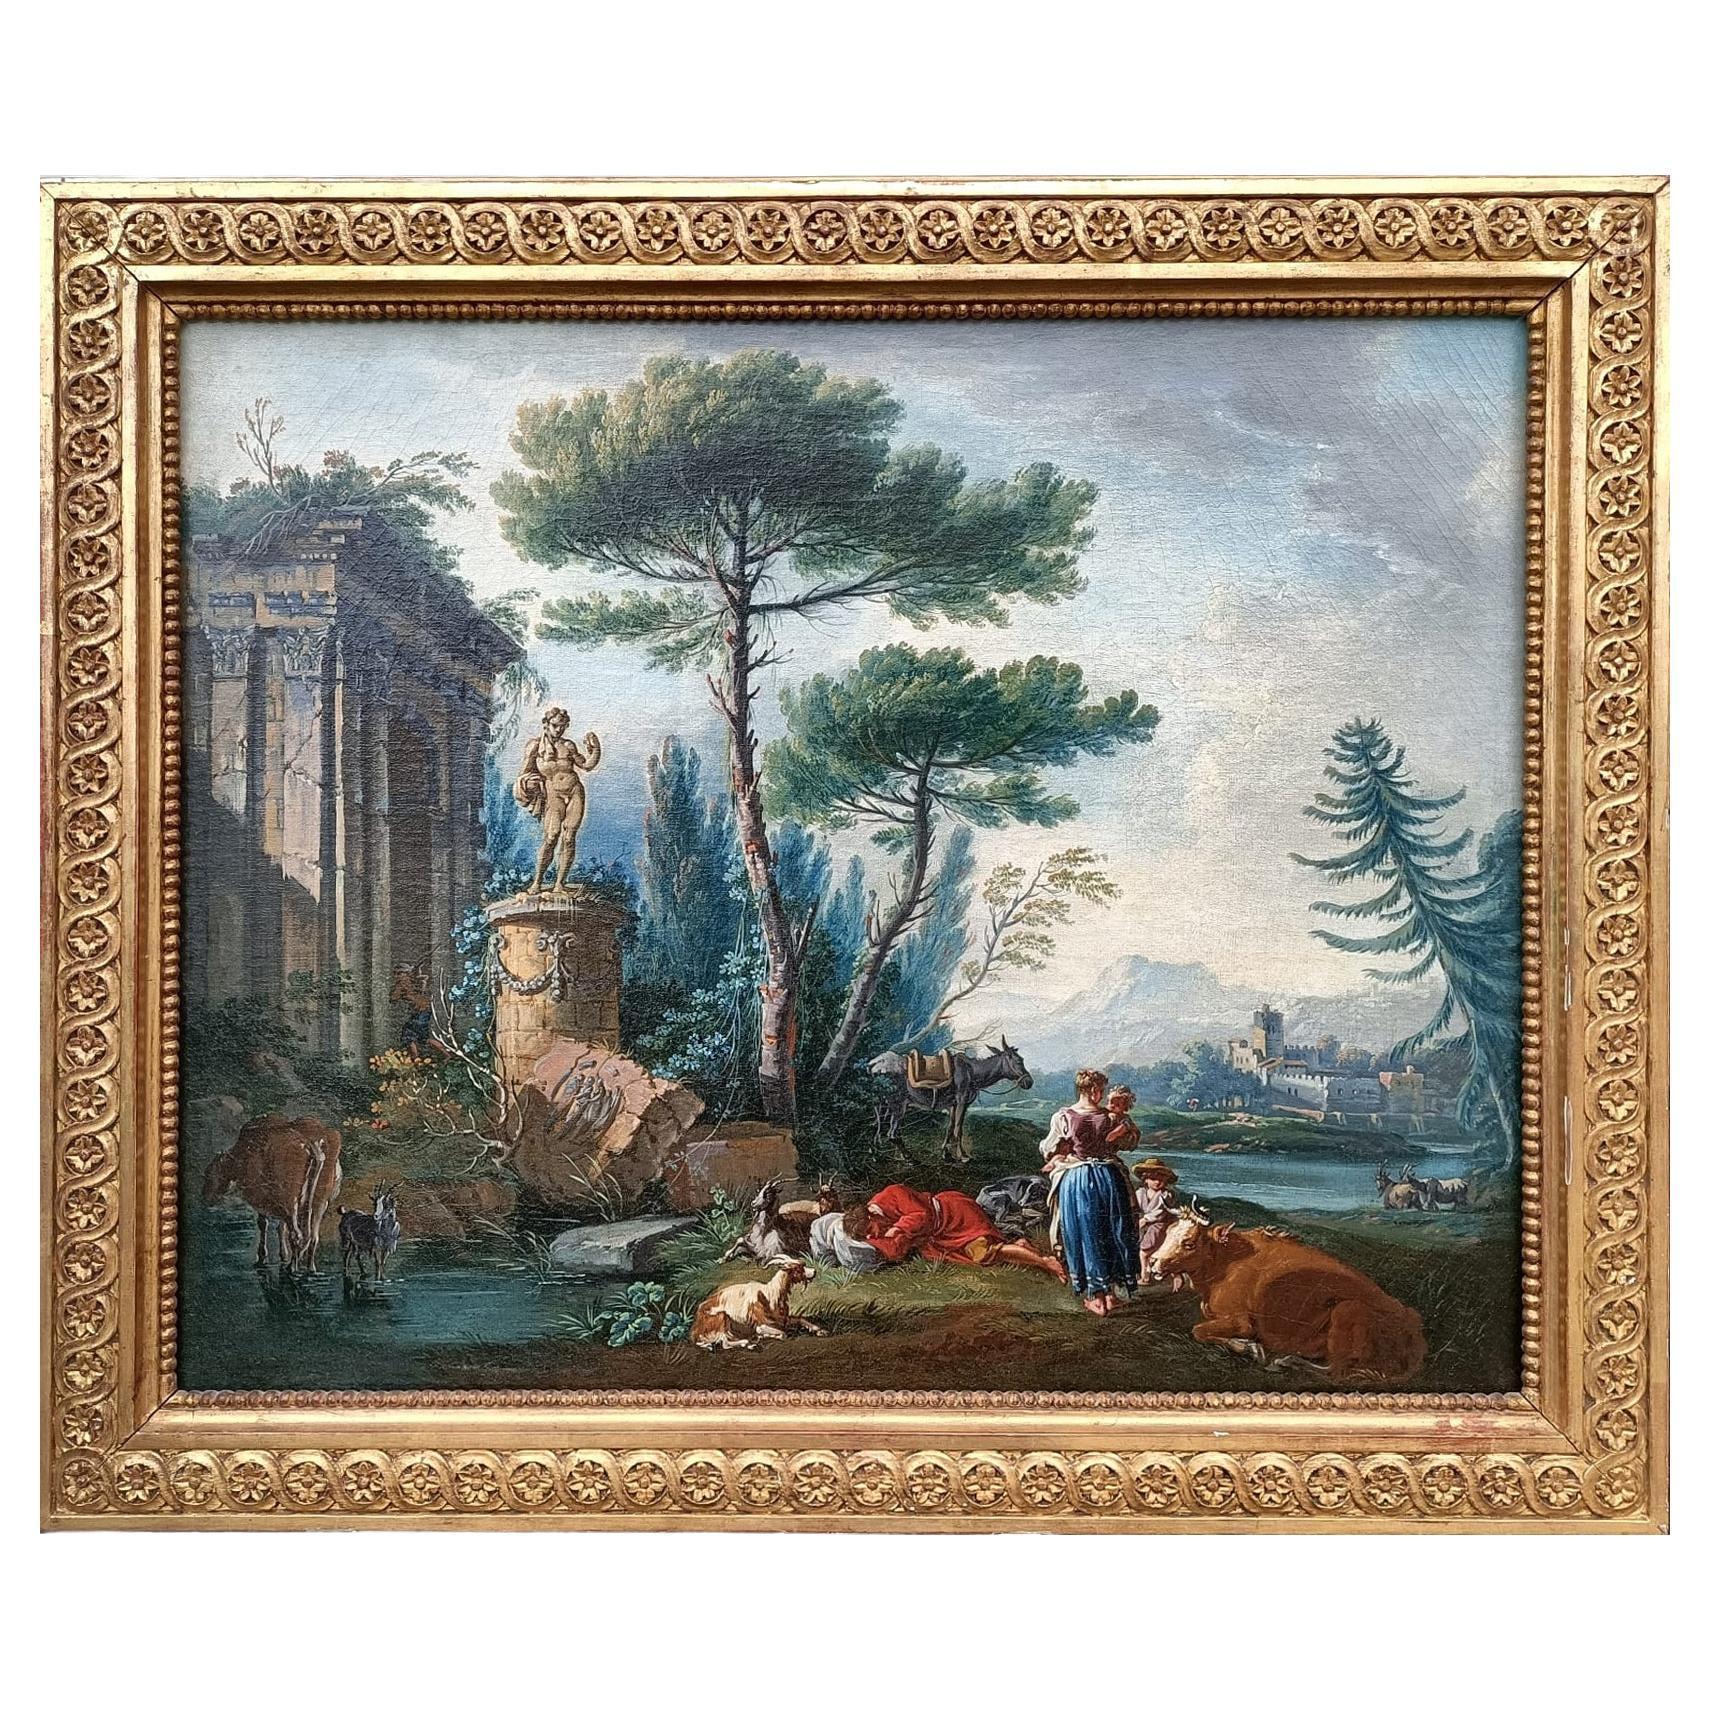 Rural Landscape Painting Attributed to J.B. Pillement, XVIII Century